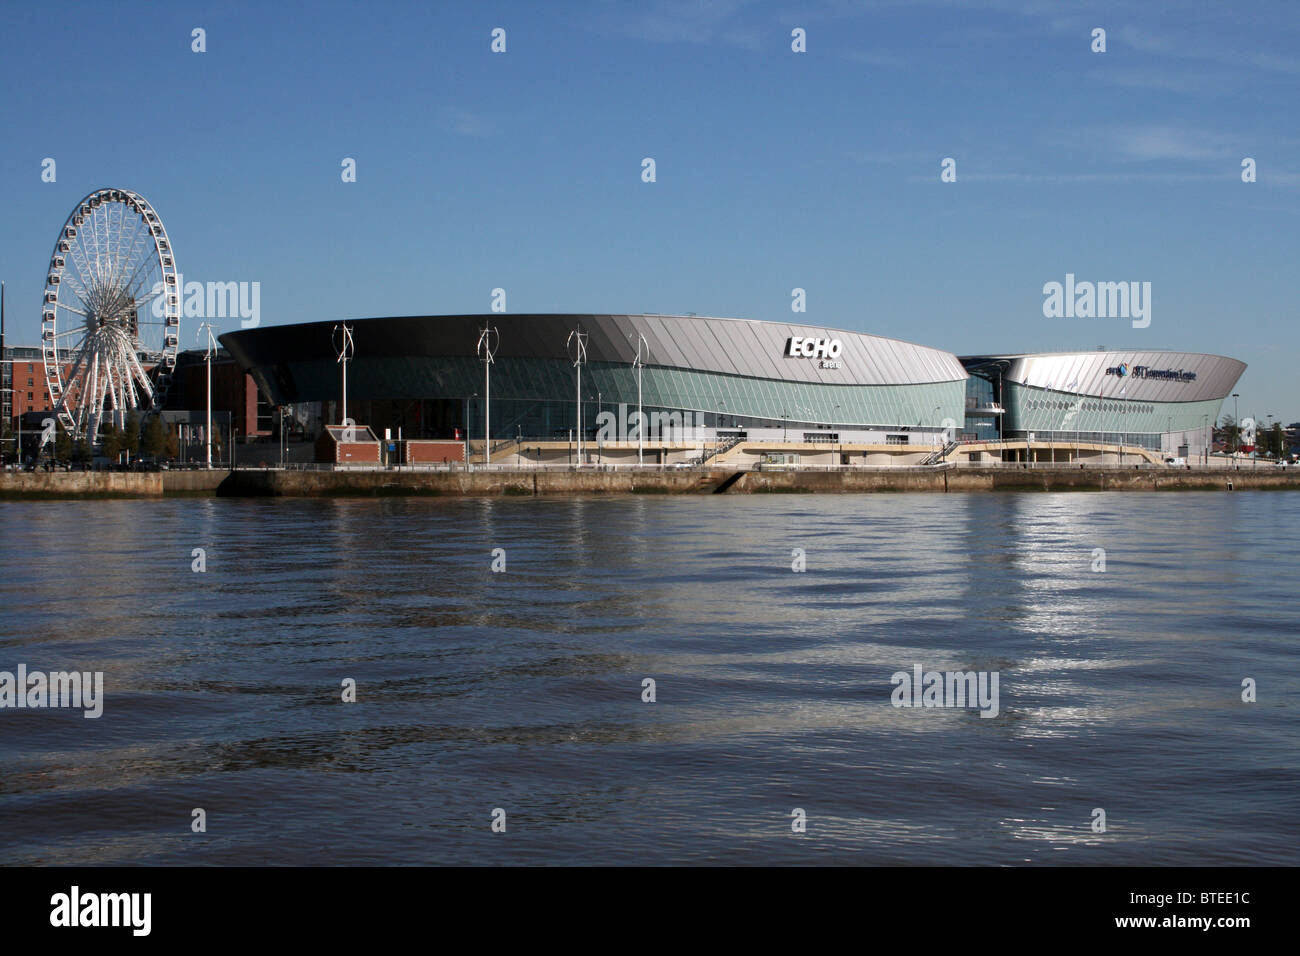 Liverpool Echo Arena And Big Wheel As Seen From The River Mersey, UK Stock Photo